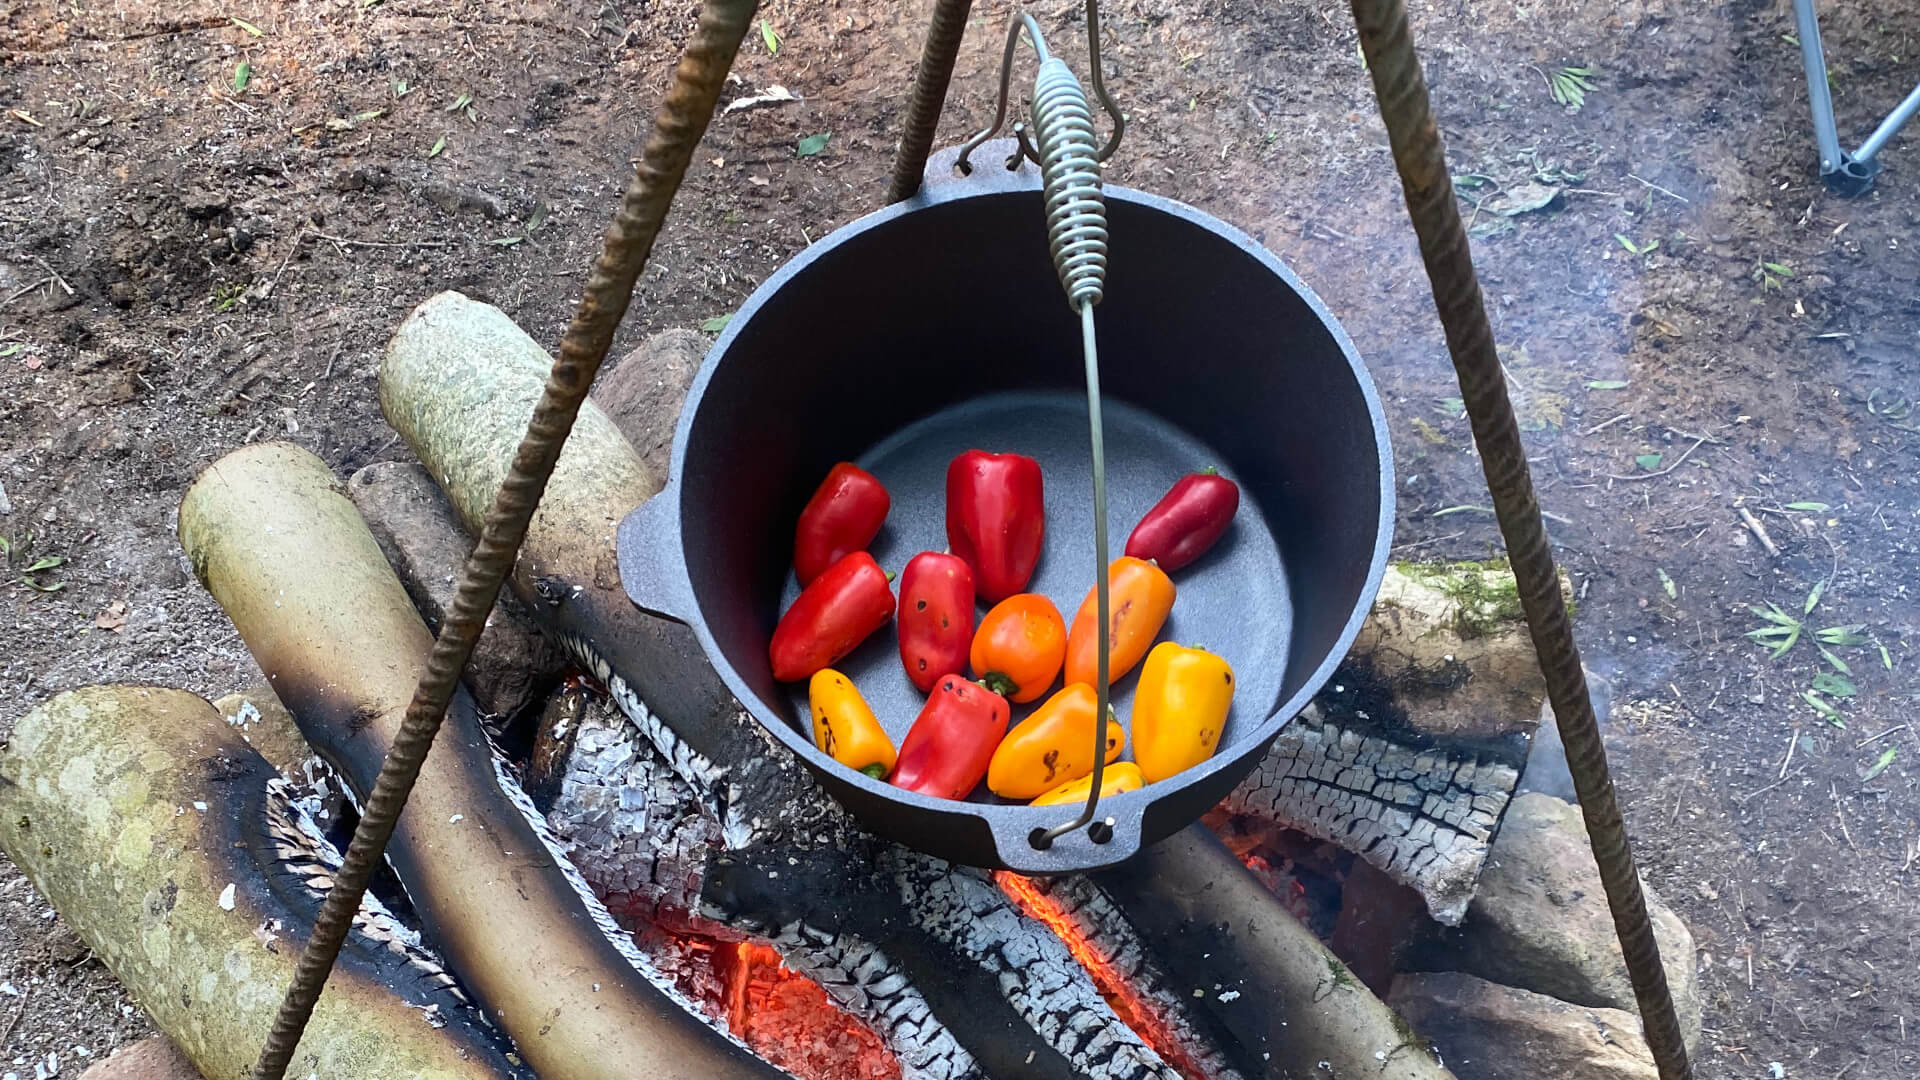 Direct4x4 Expedition Campsite Cooking Gear